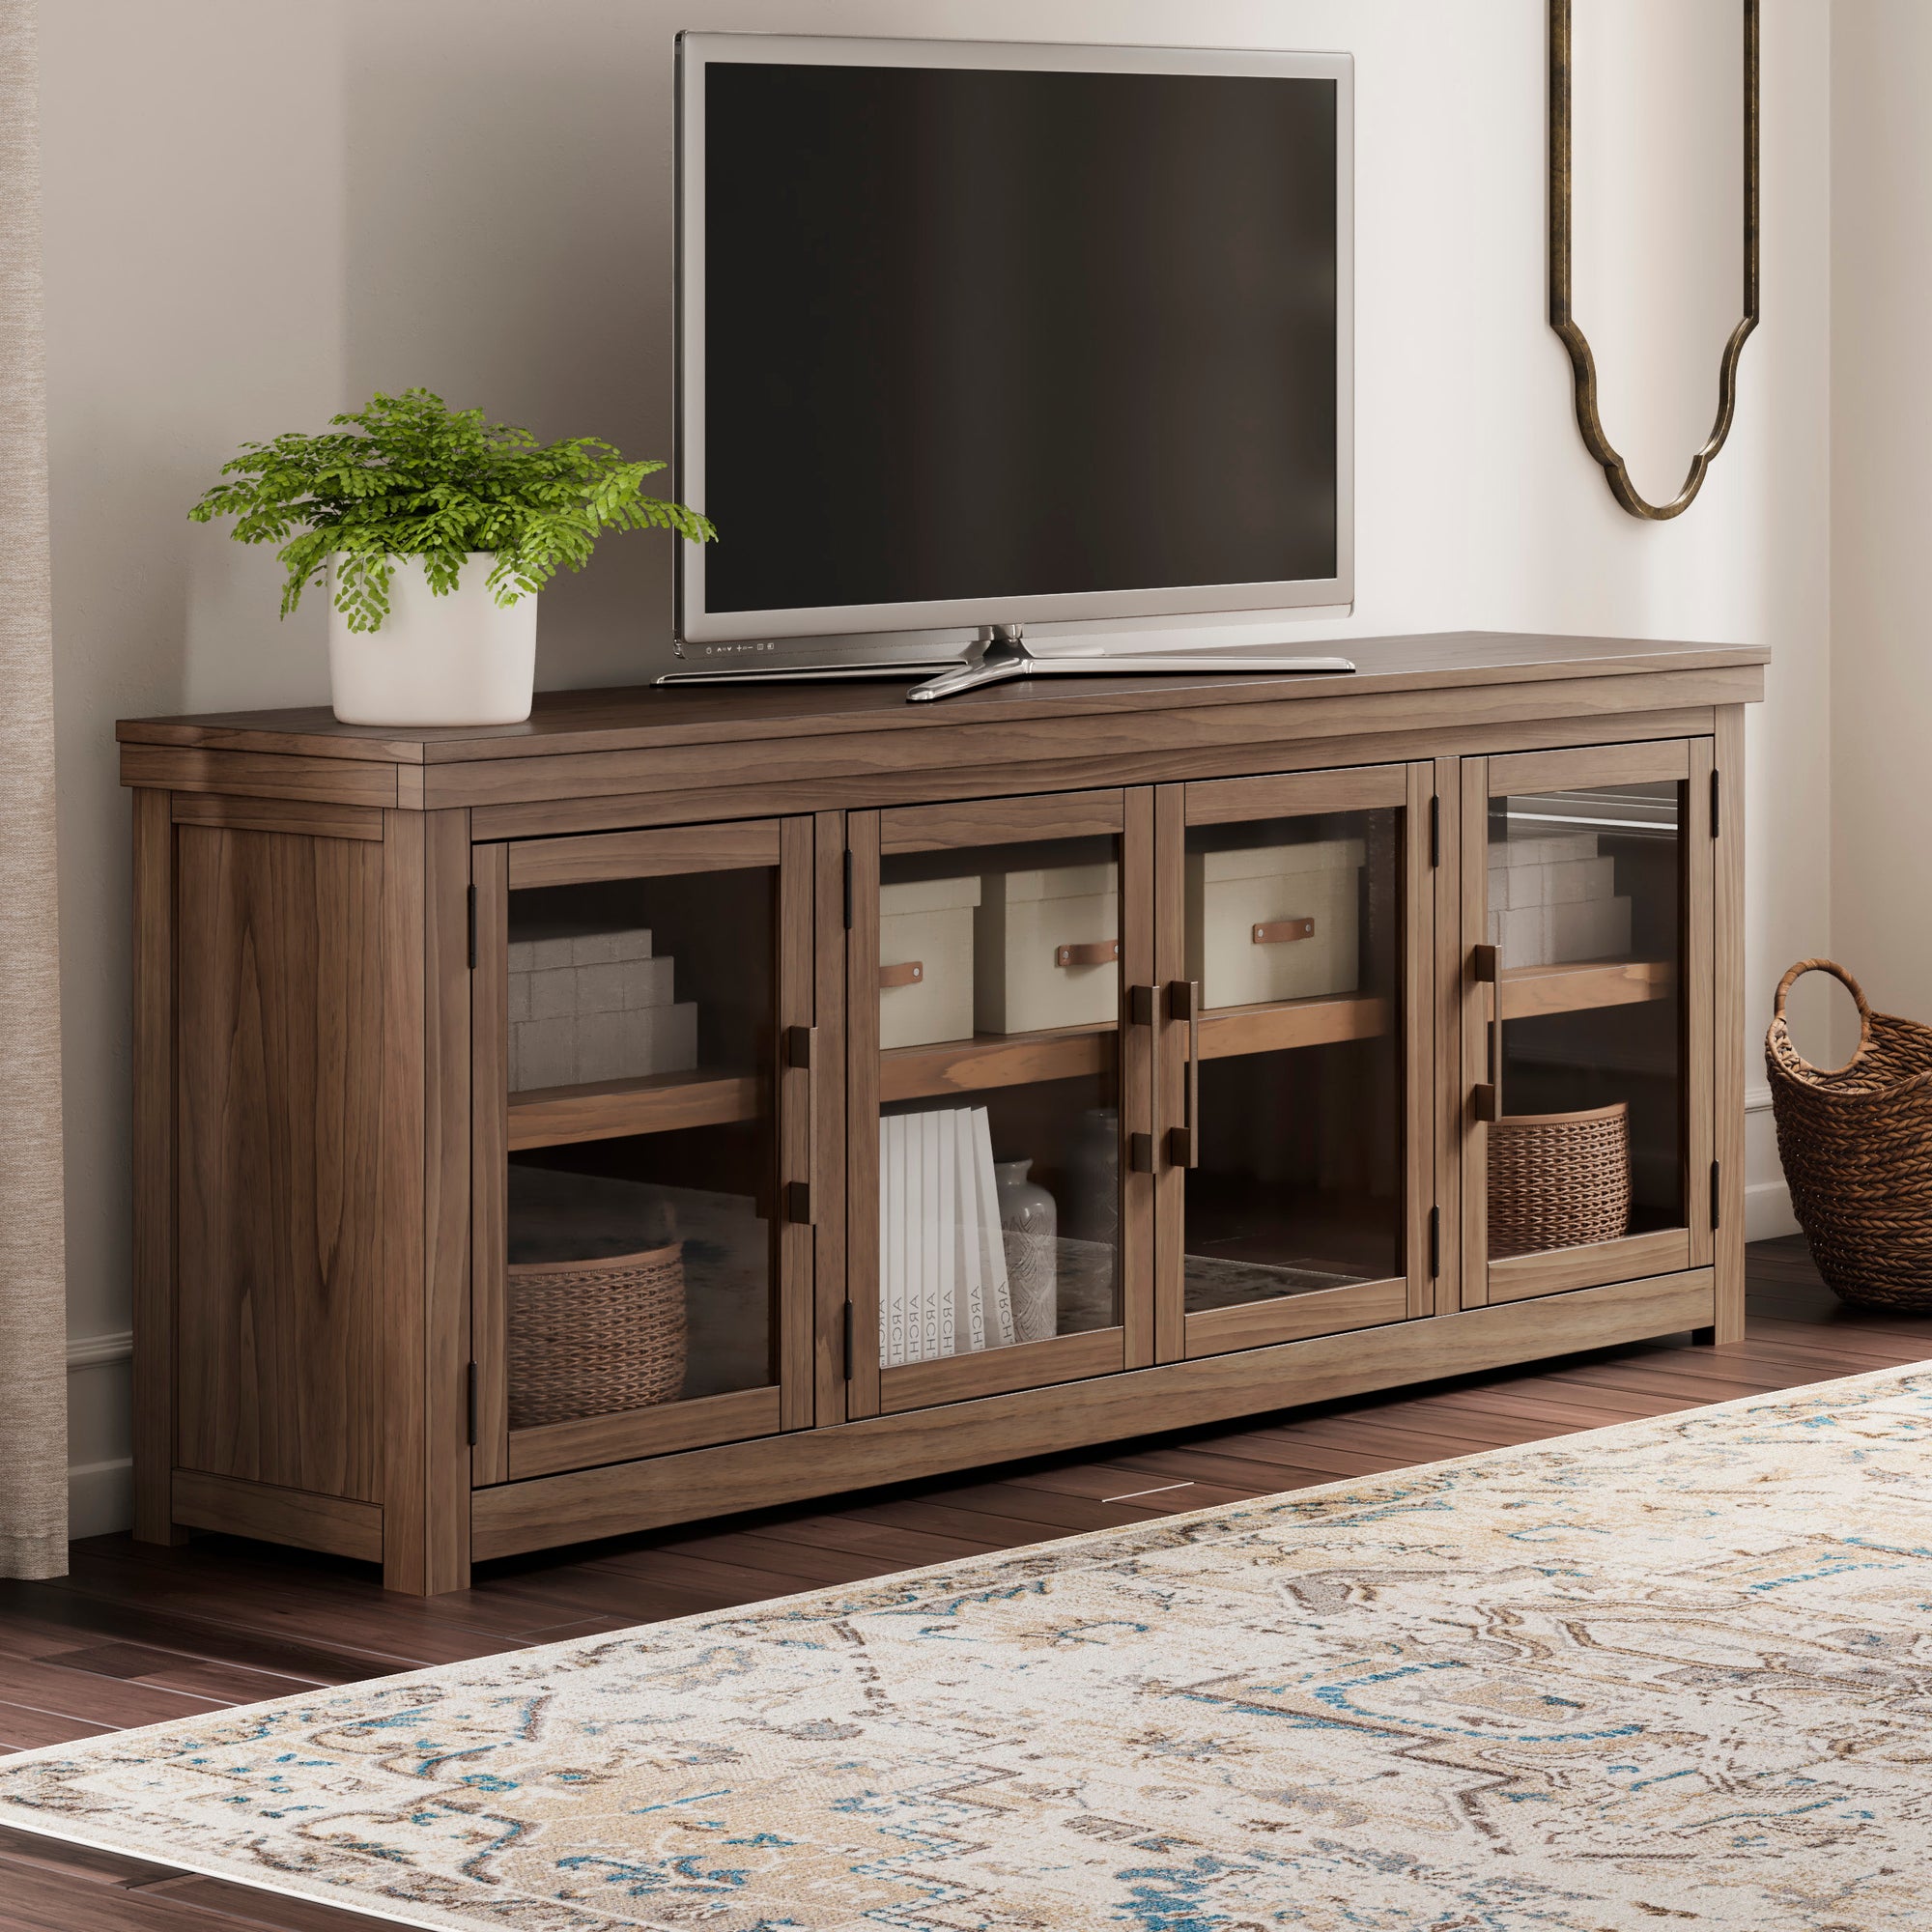 Boardernest TV Stand - 85 Inch